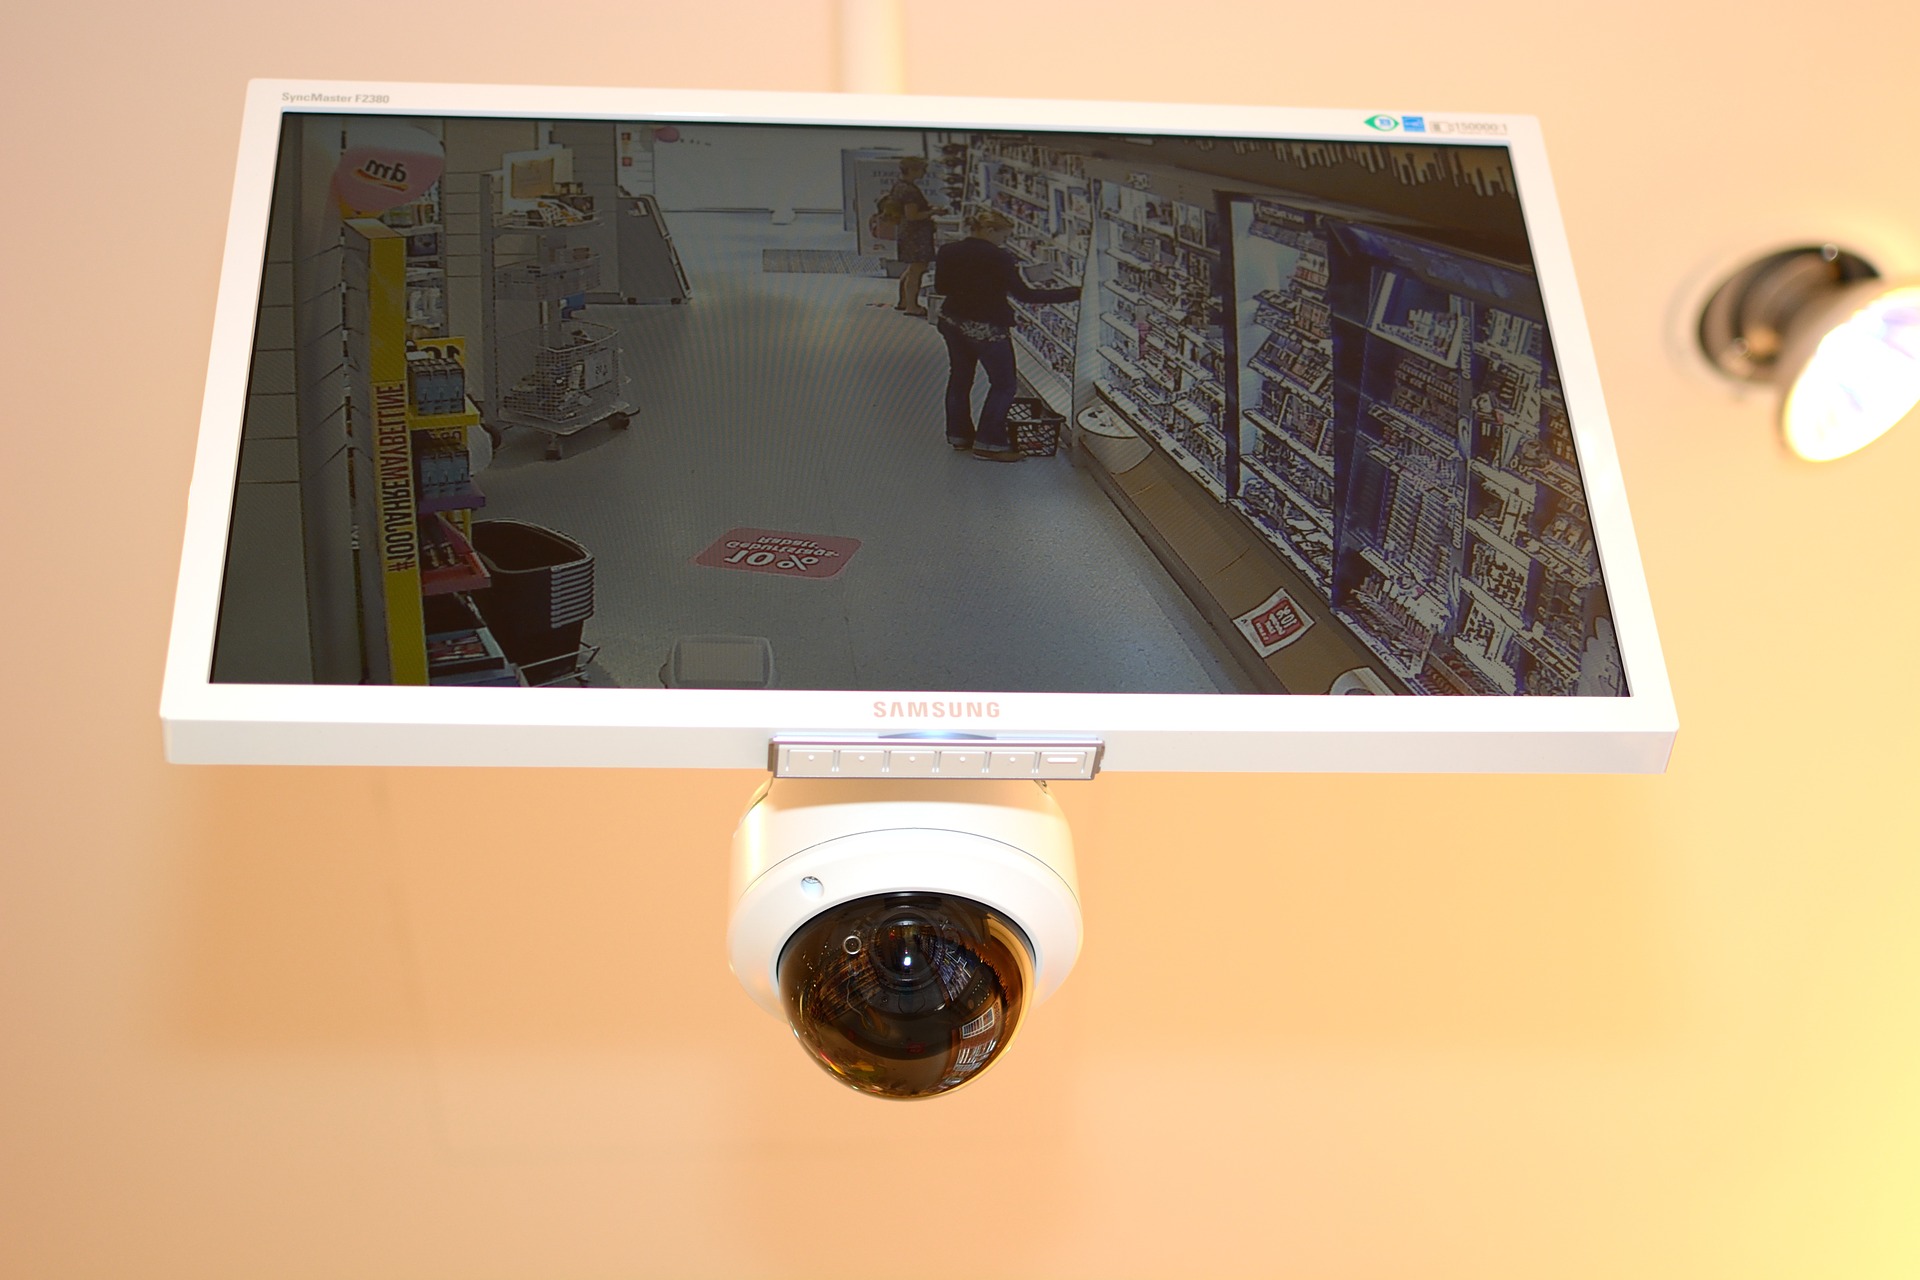 Retail Stores Are Now Using Facial Recognition to Catch Shoplifters